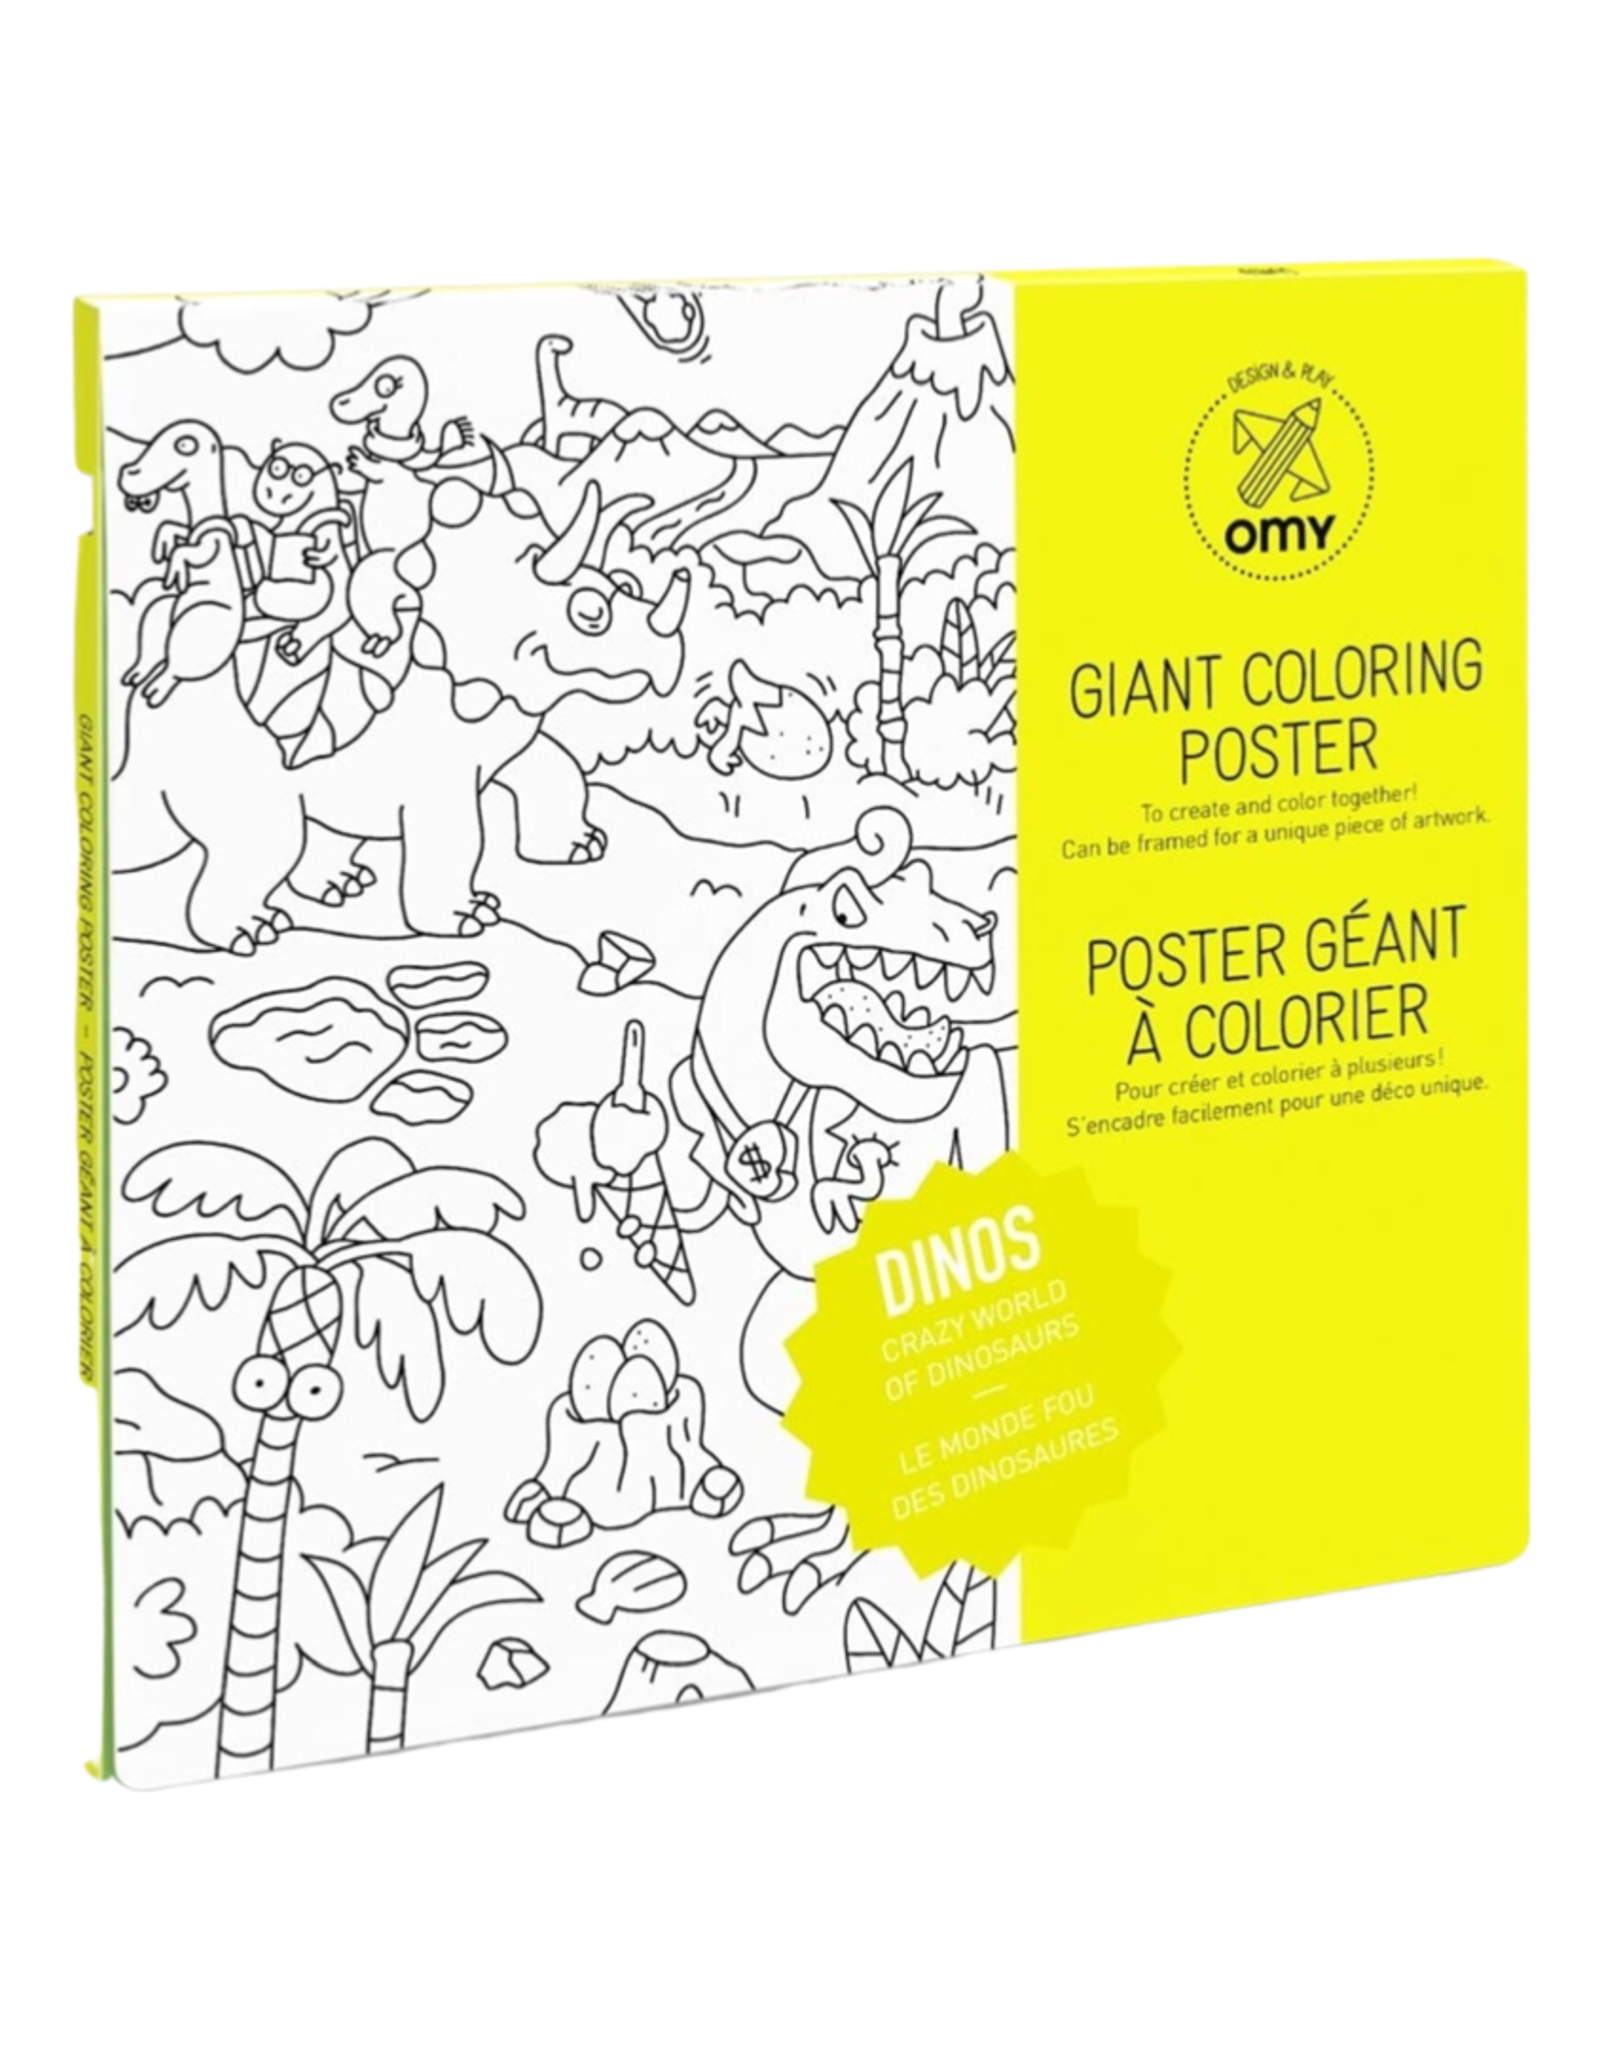 OMY Giant Coloring Poster Dinos